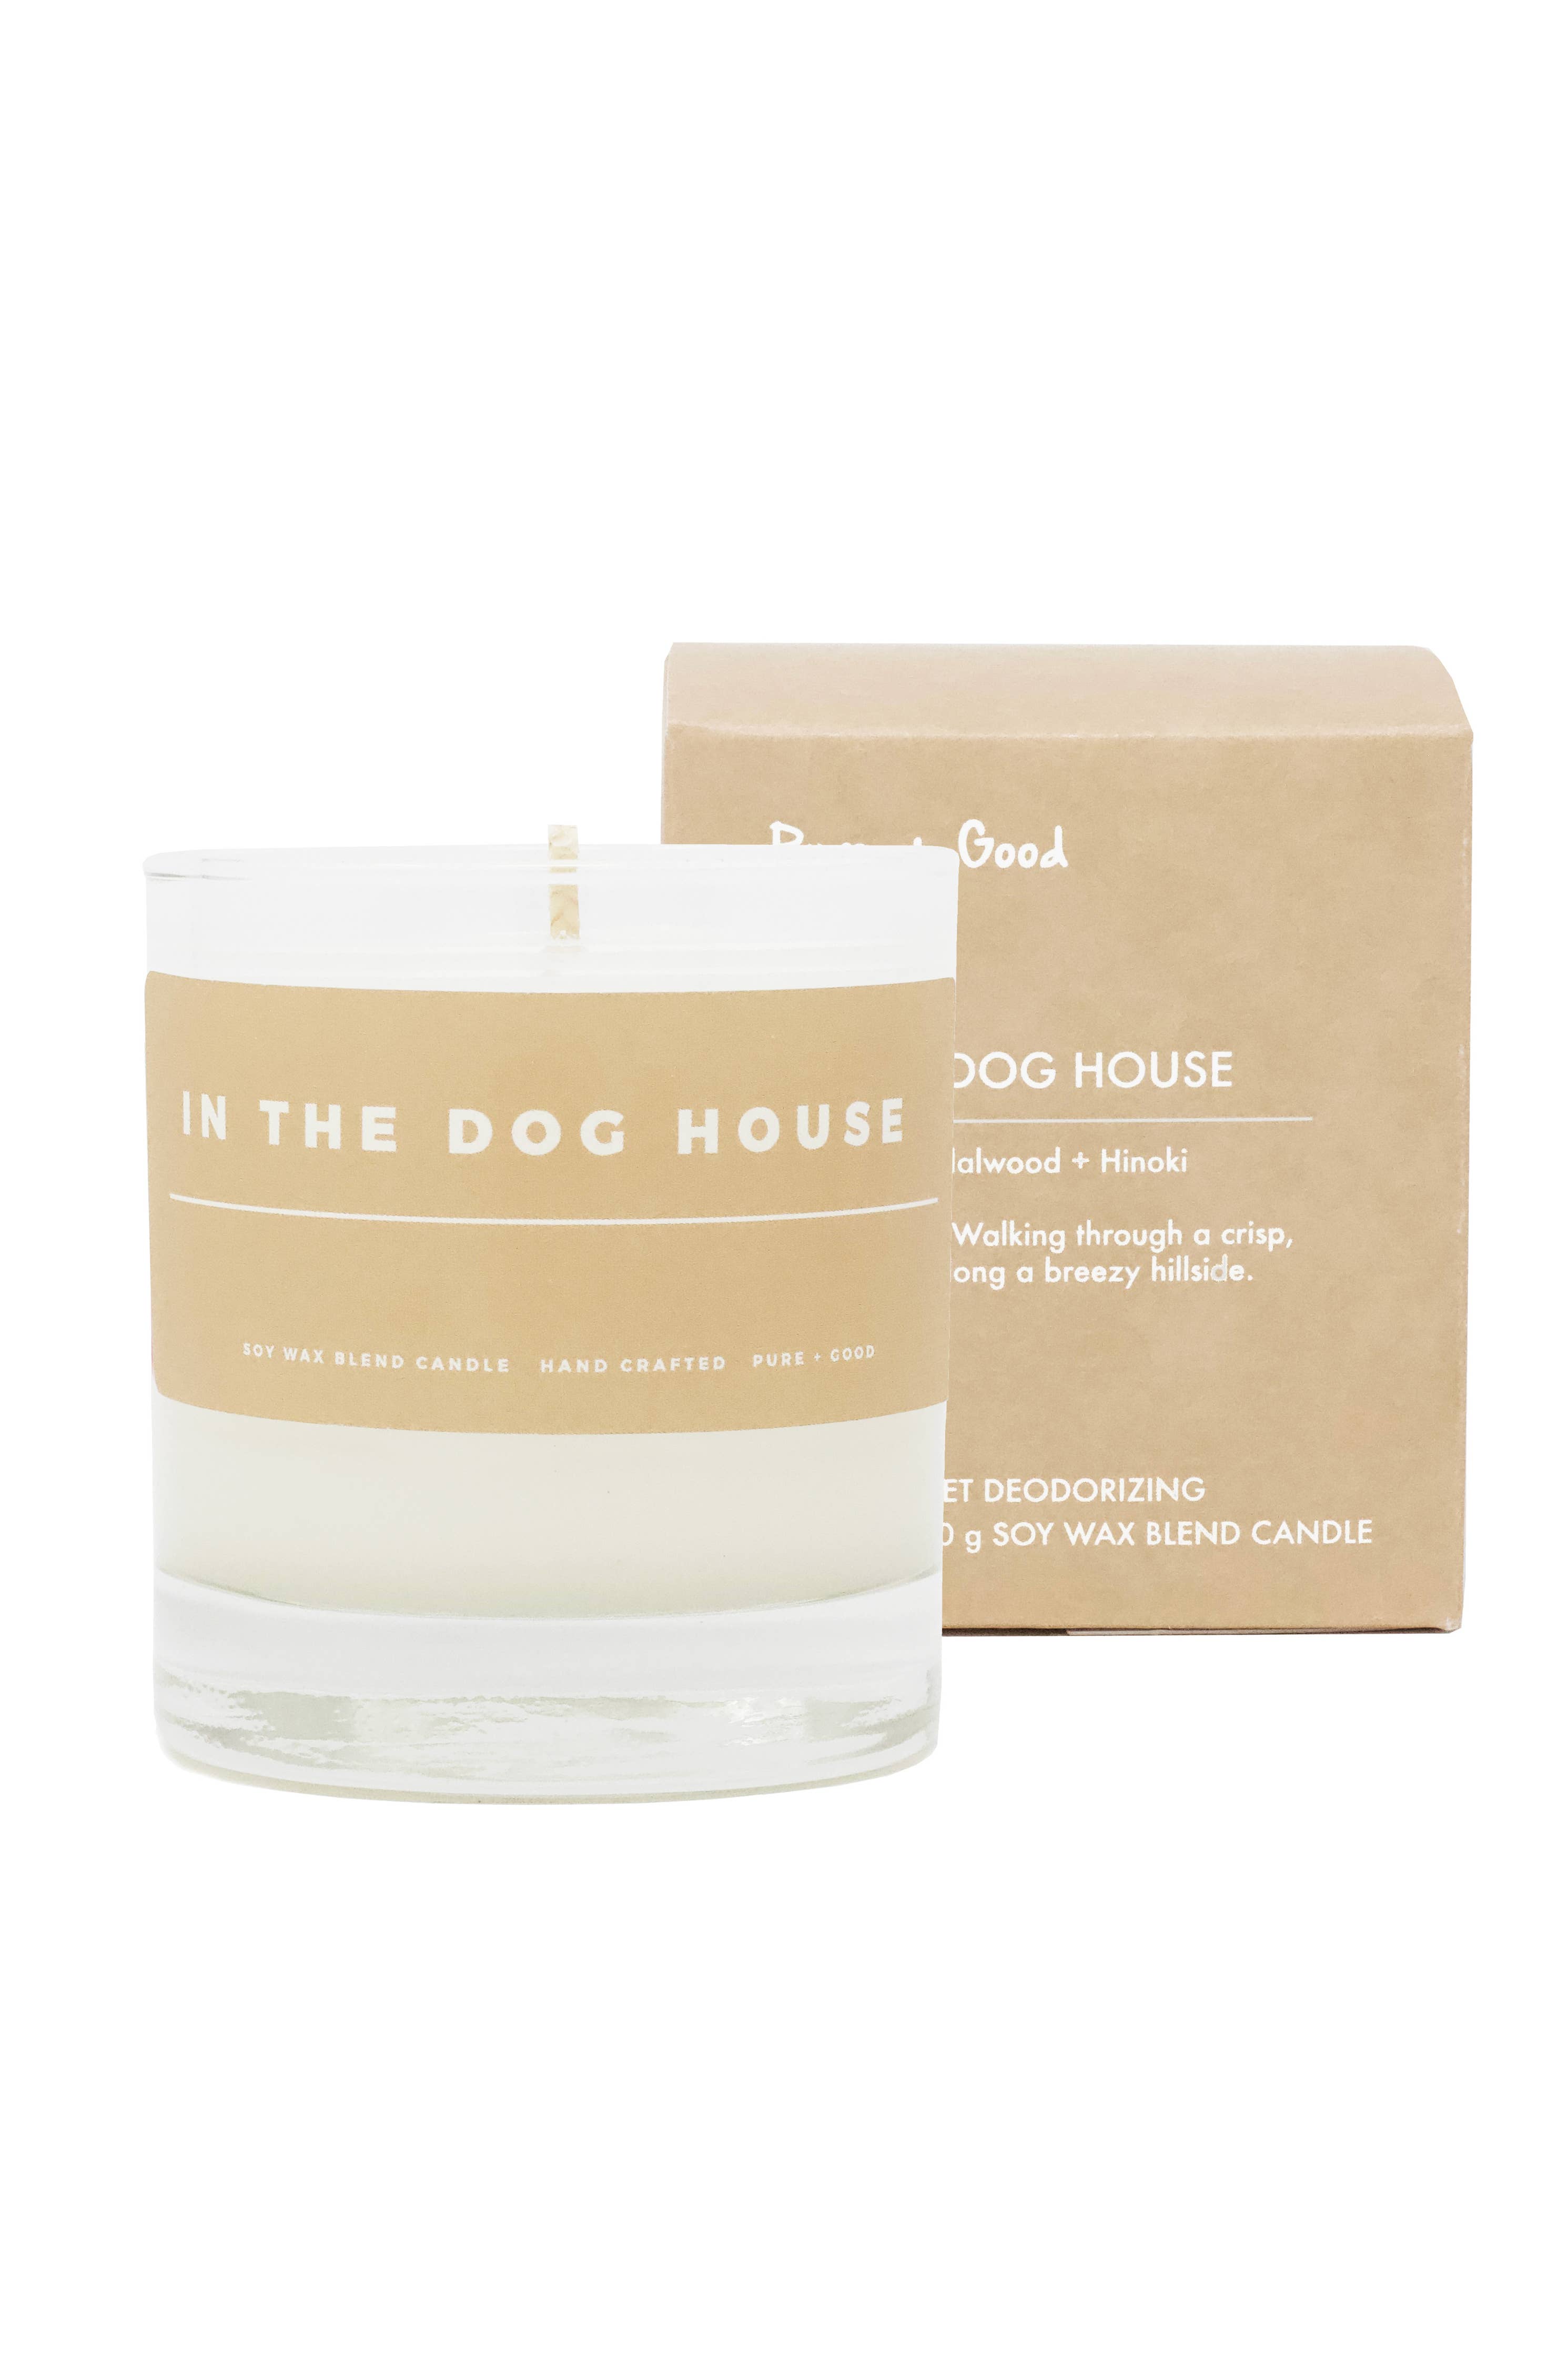 In The Dog House: Sandalwood + Hinoki, Soy Wax Blend Candle